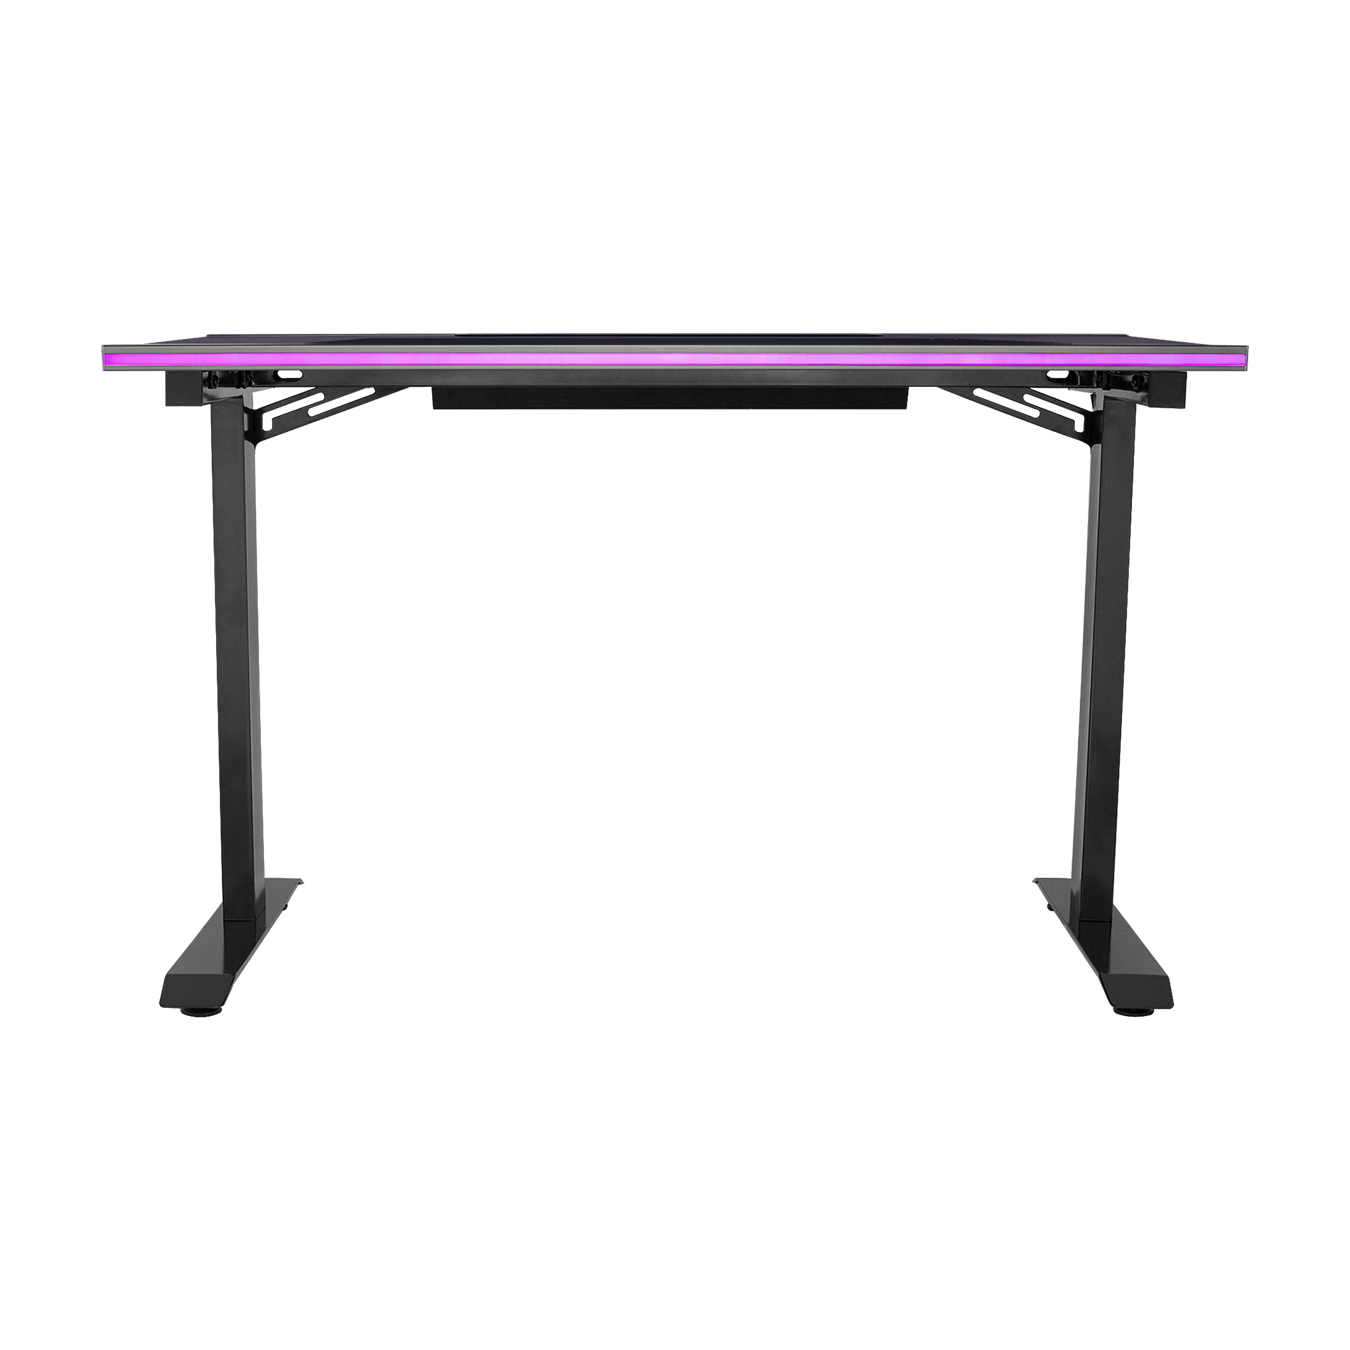 GD120 ARGB Gaming Desk - Front view with purple LED lights